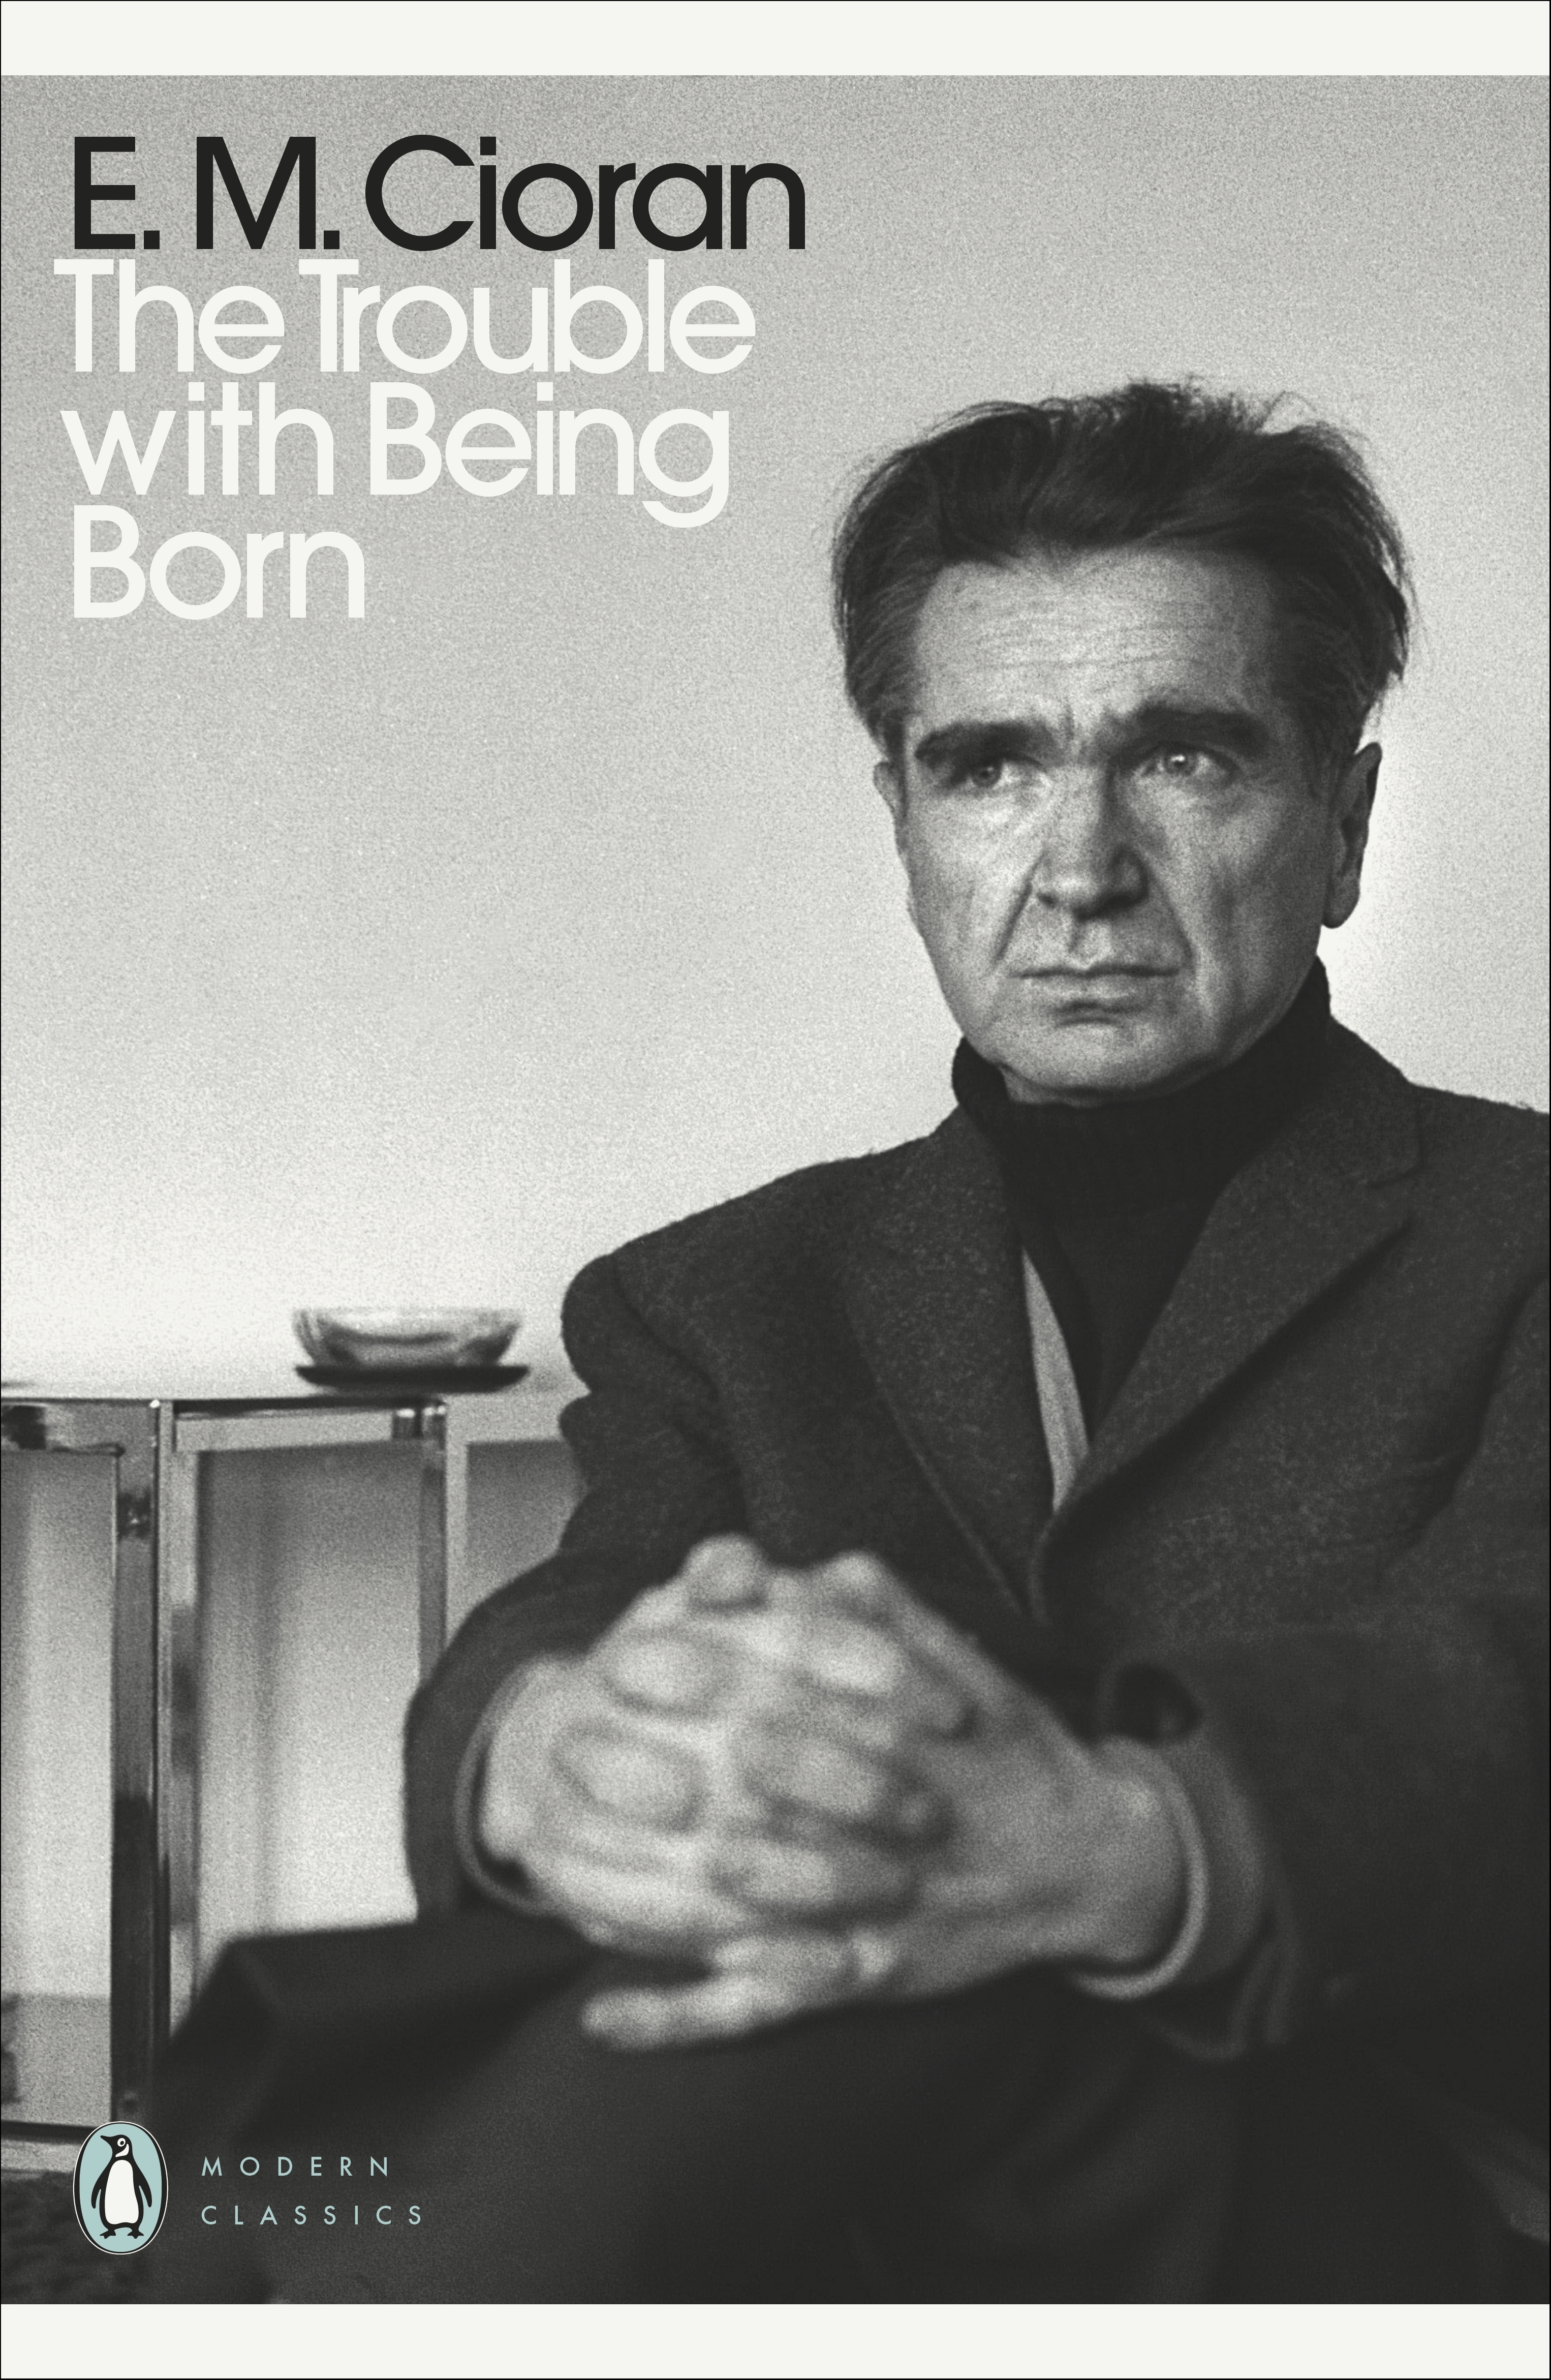 The Trouble With Being Born by E. M. Cioran - Penguin Books Australia